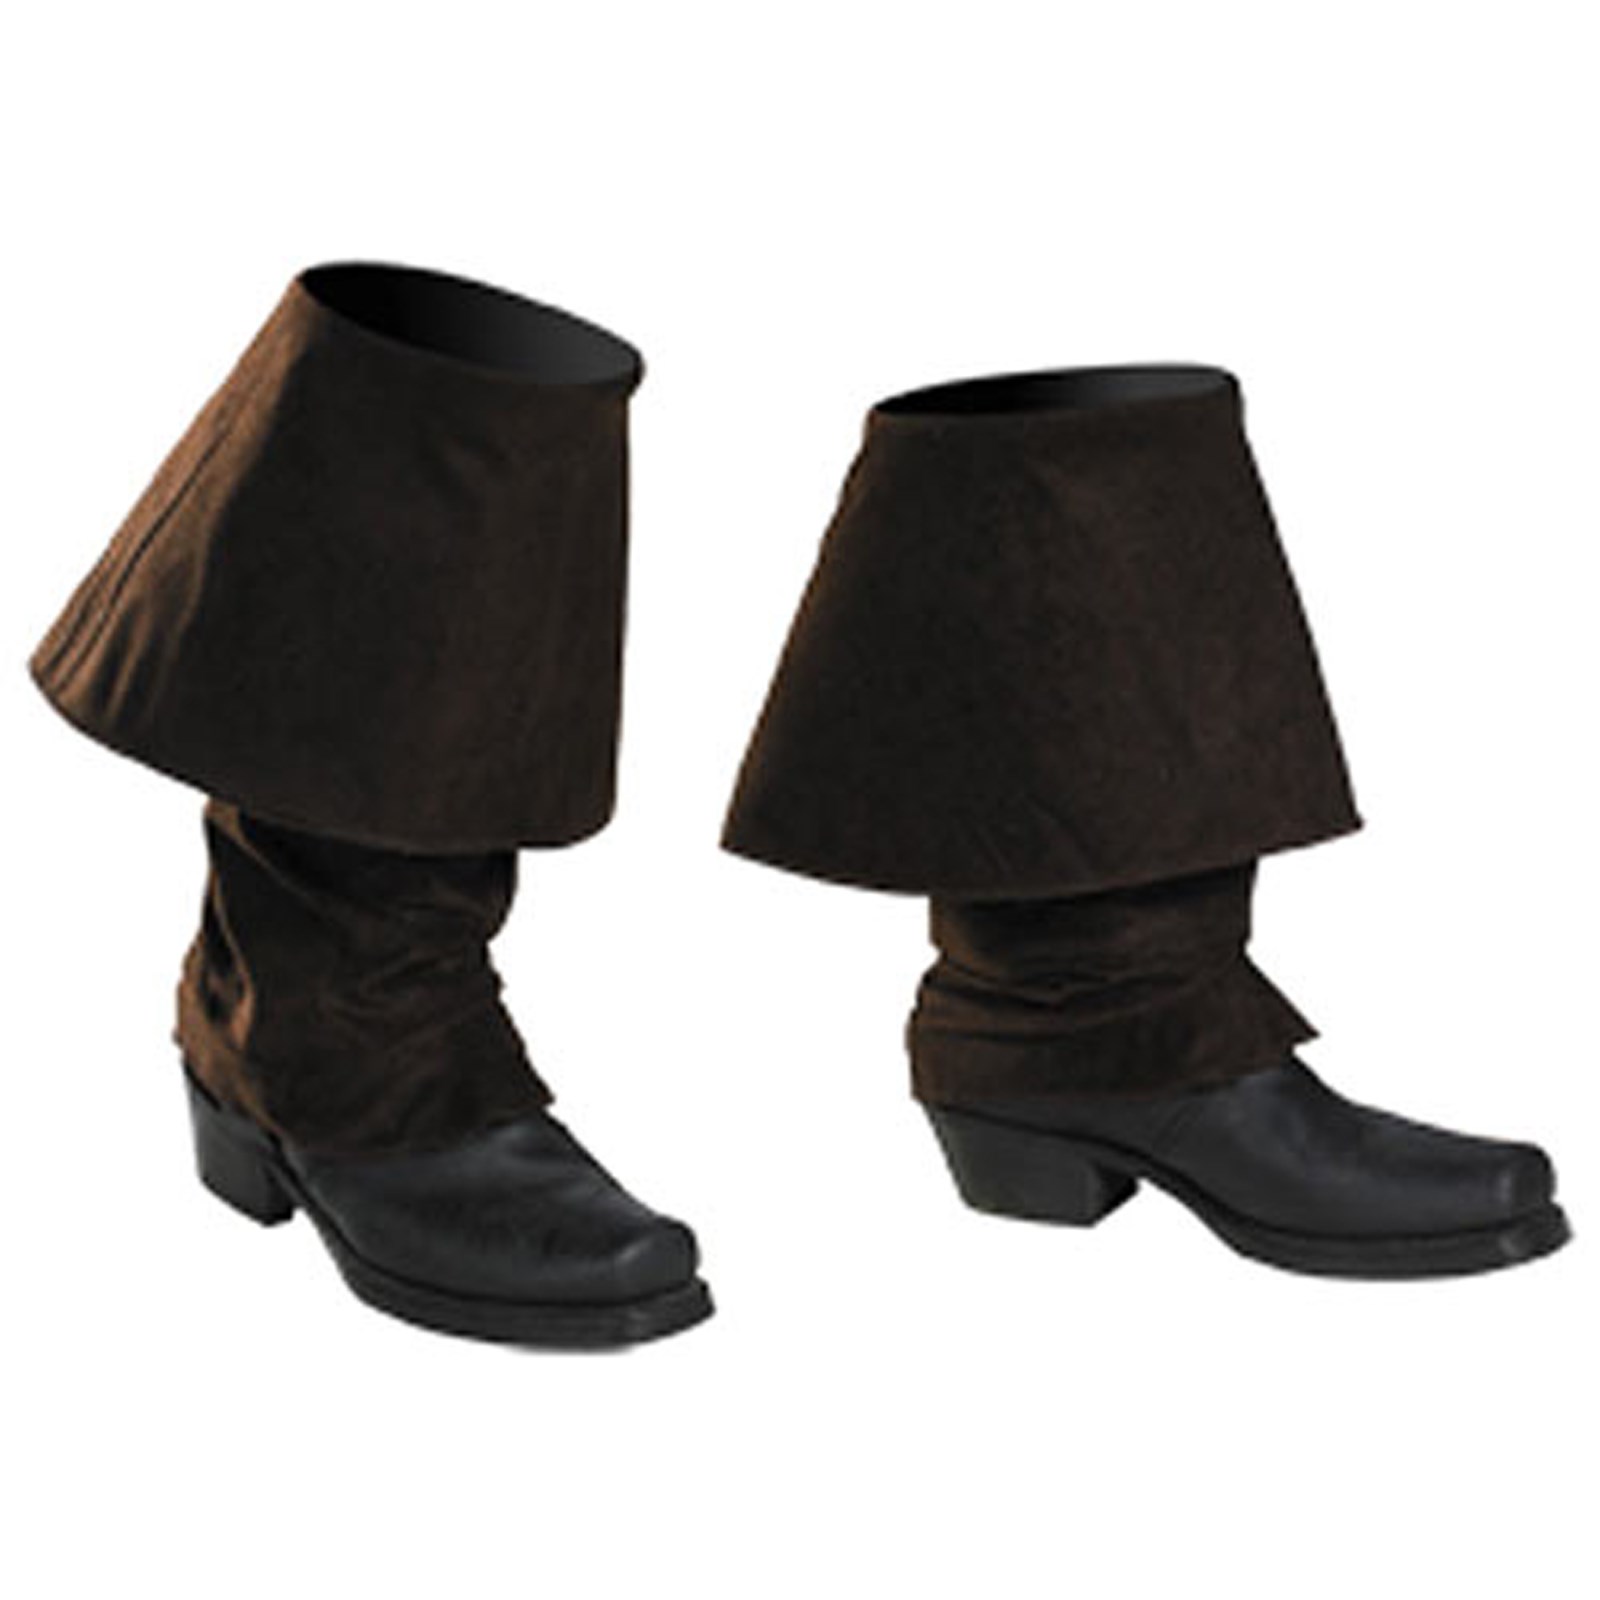 Pirates of the Caribbean - Jack Sparrow Child Boot Covers